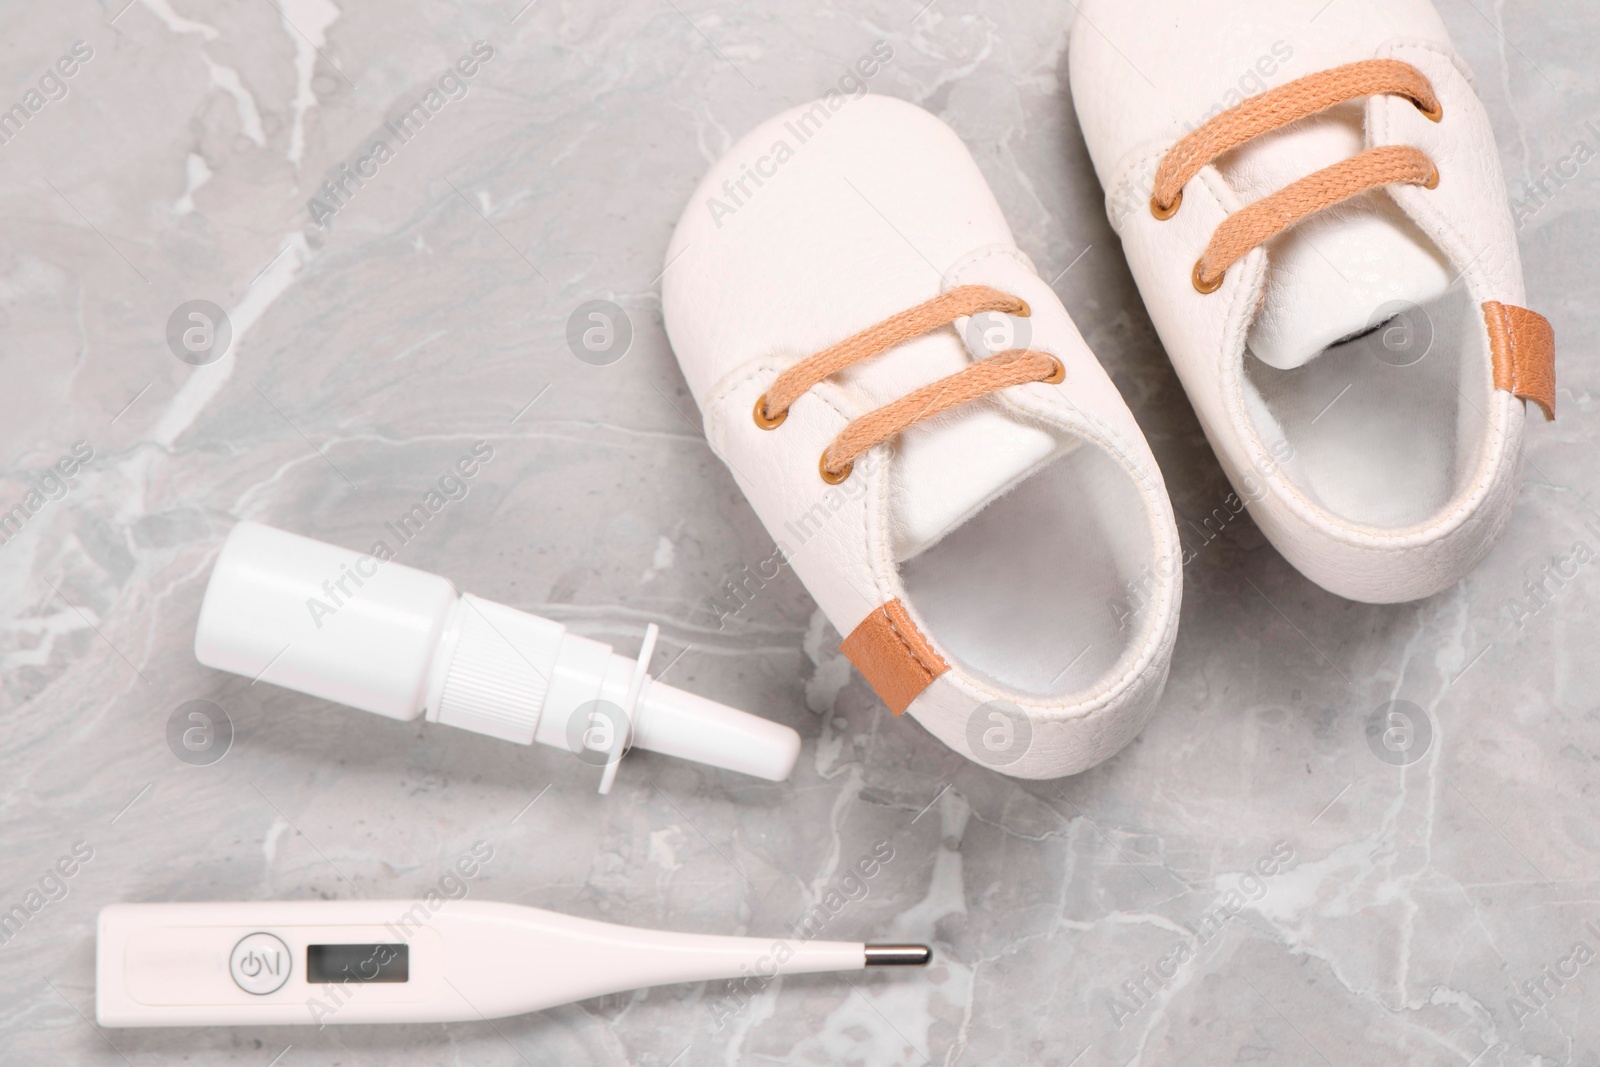 Photo of Kid's shoes, thermometer and nasal spray on gray marble background, flat lay